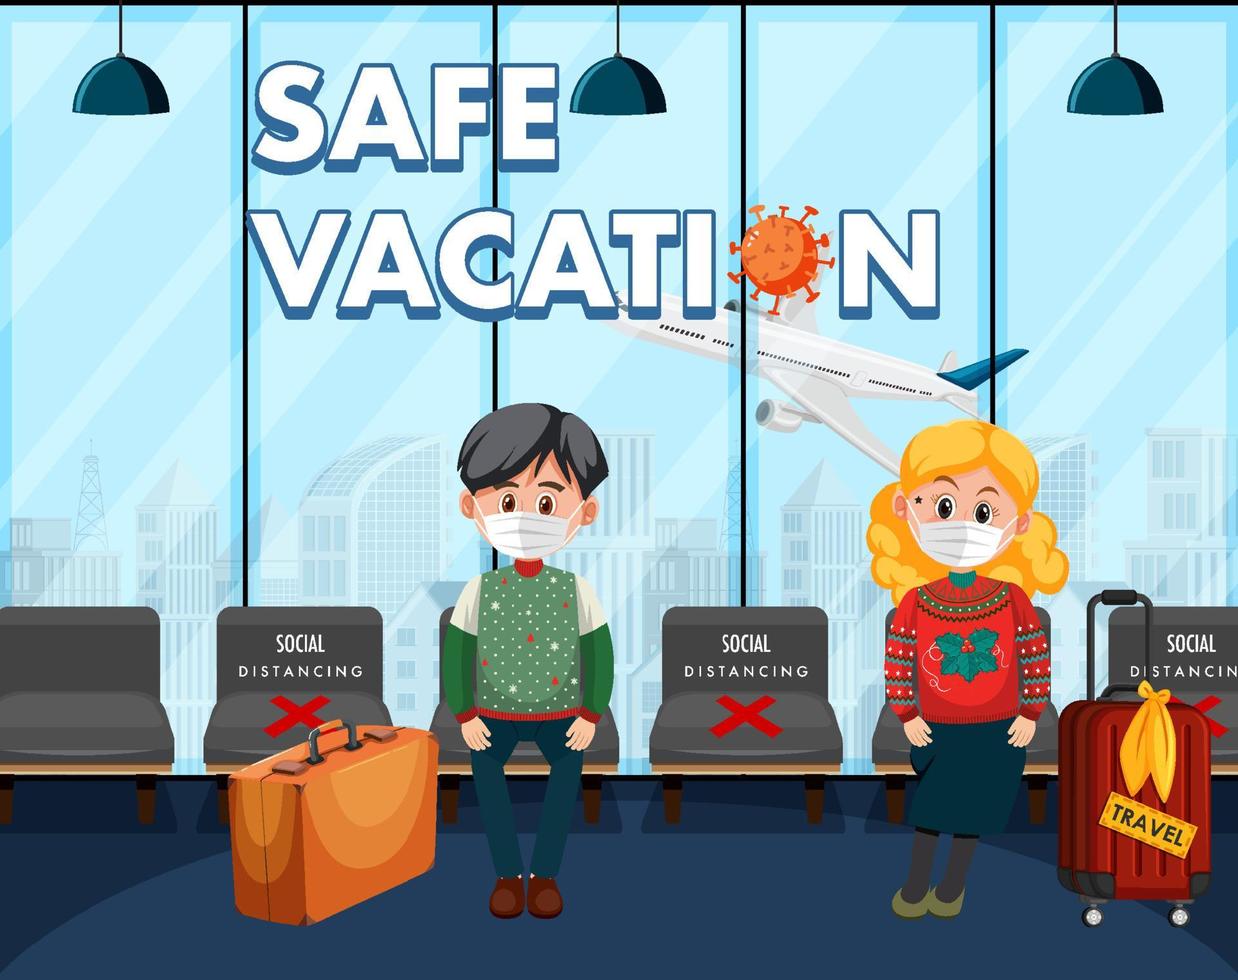 In airport terminal scene with passengers wearing mask vector